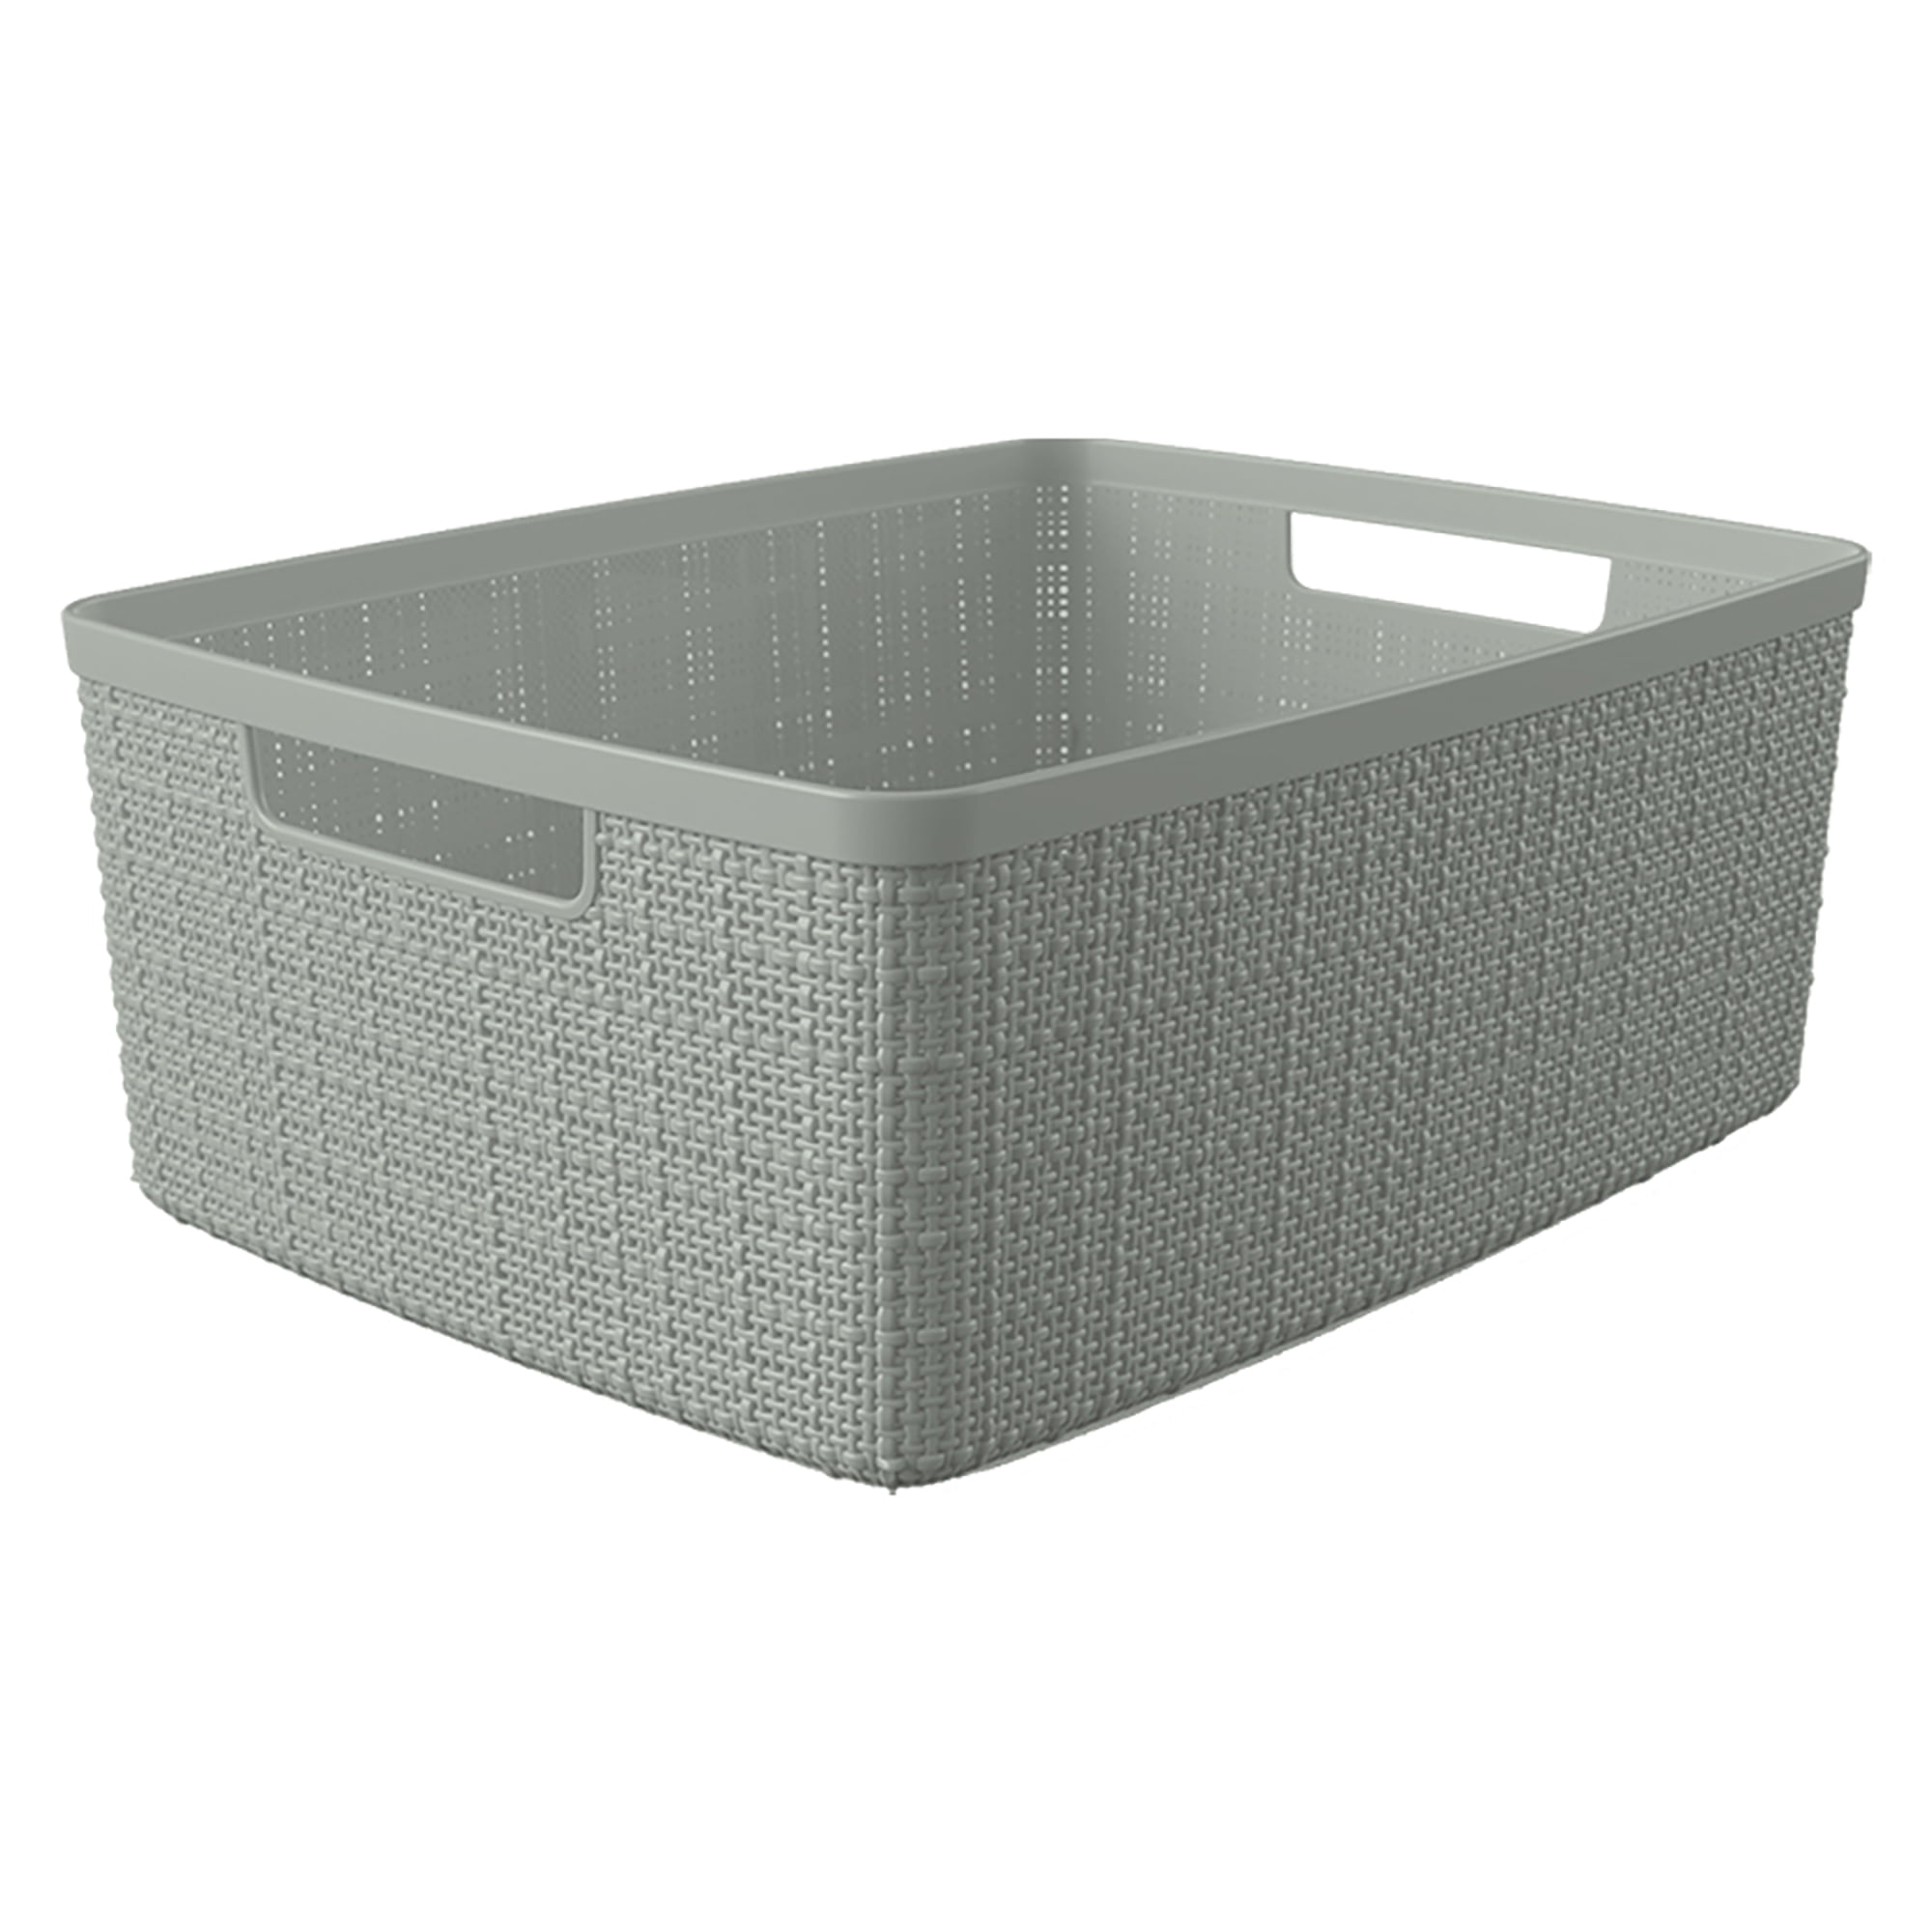 COLLEGE 24 Pack HOME LOGIC Collapsible Fabric Bins  GRAY NEW 